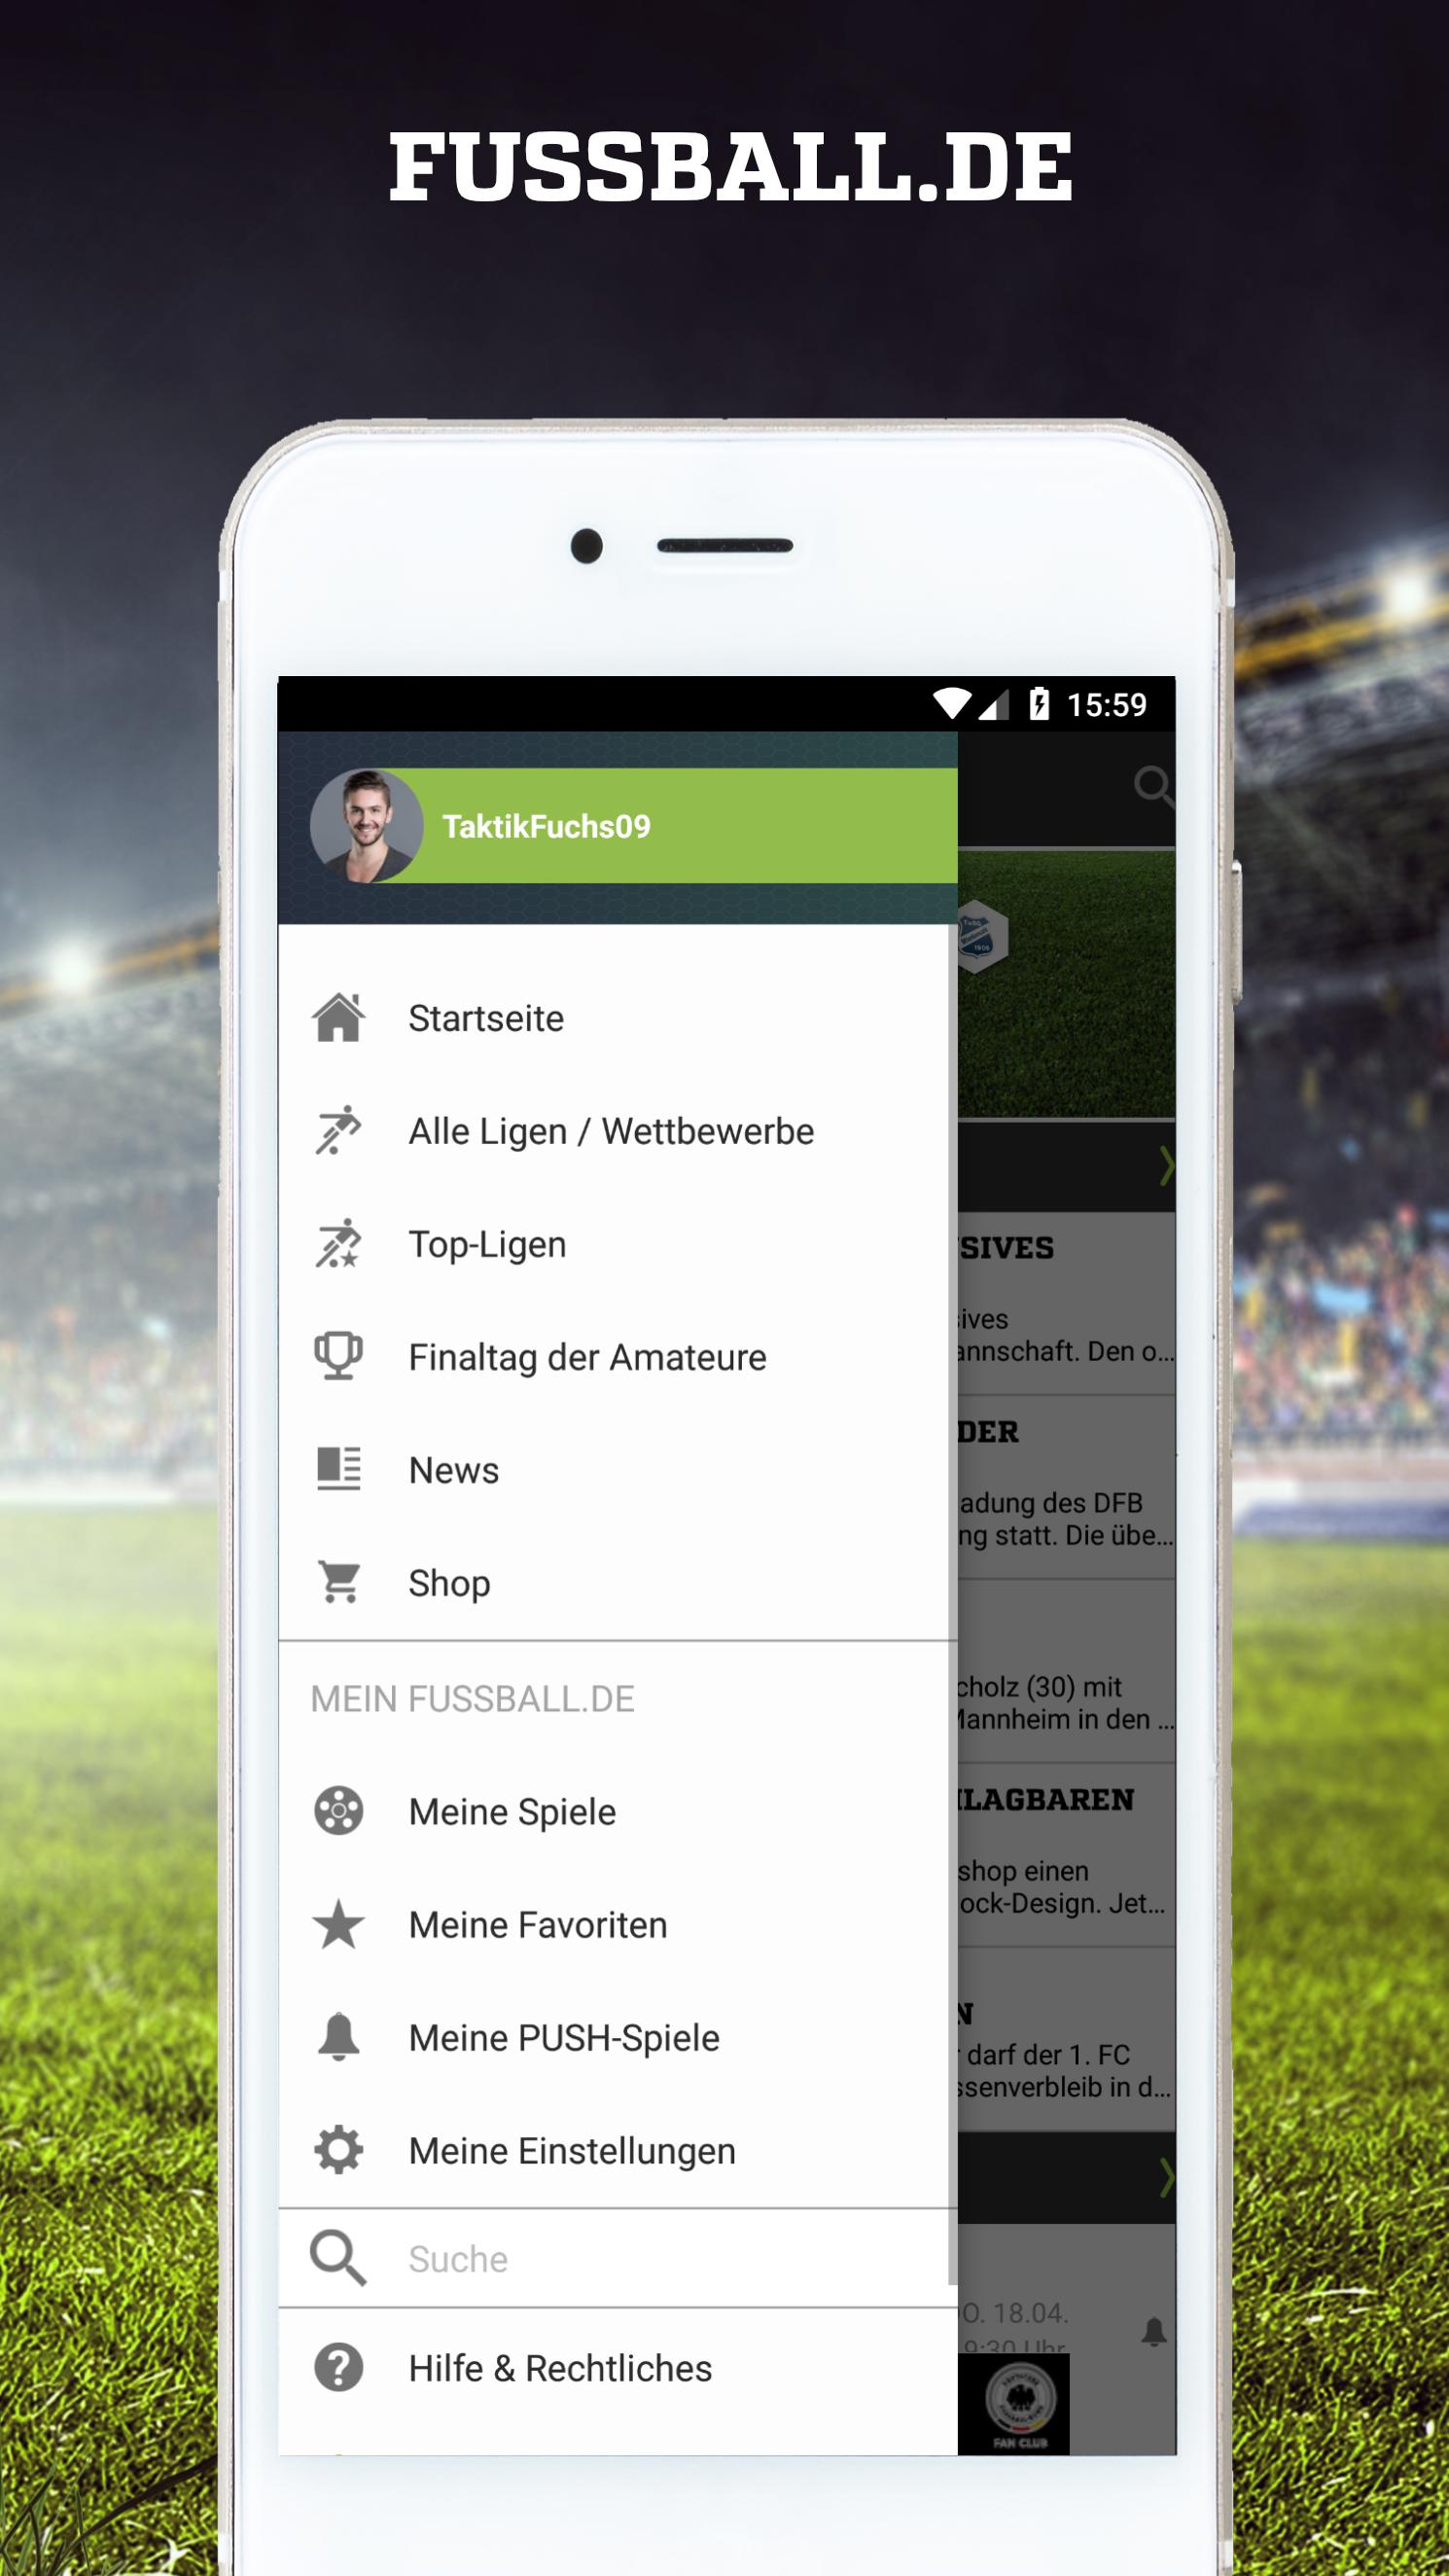 FUSSBALL.DE for Android - APK Download